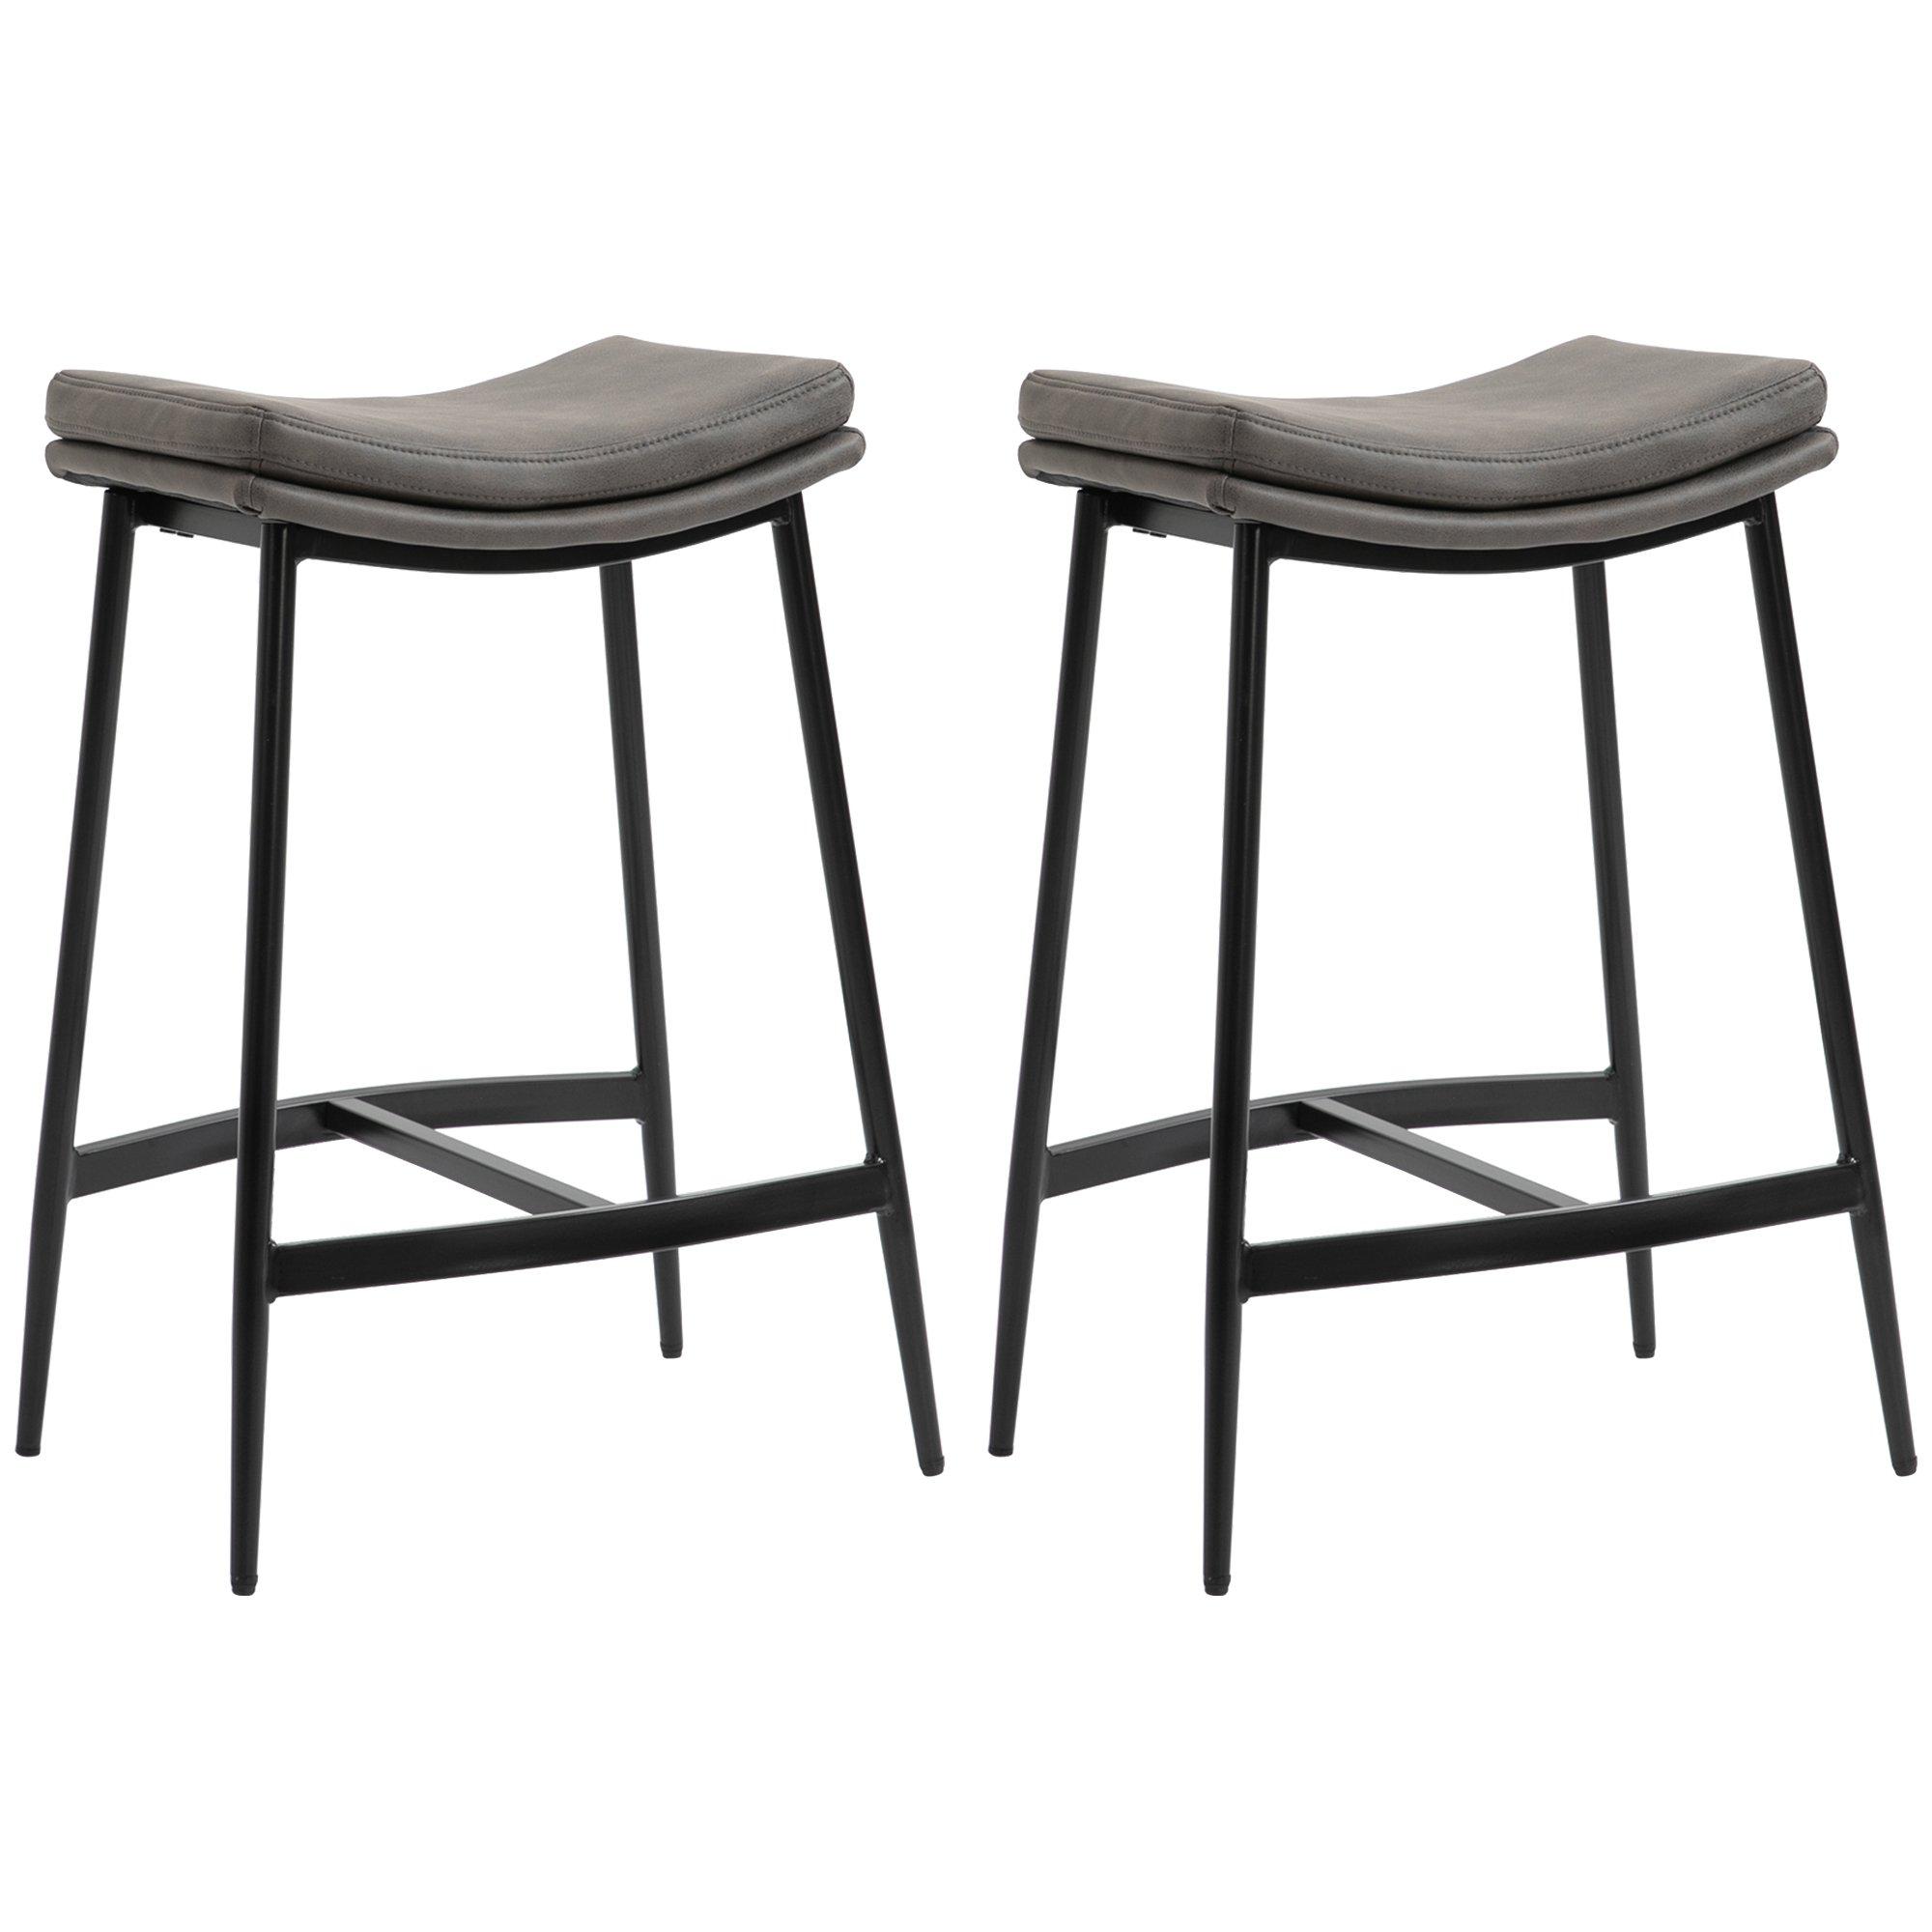 Industrial Bar Stools Set of 2 Kitchen Stools for Dining Room Kitchen